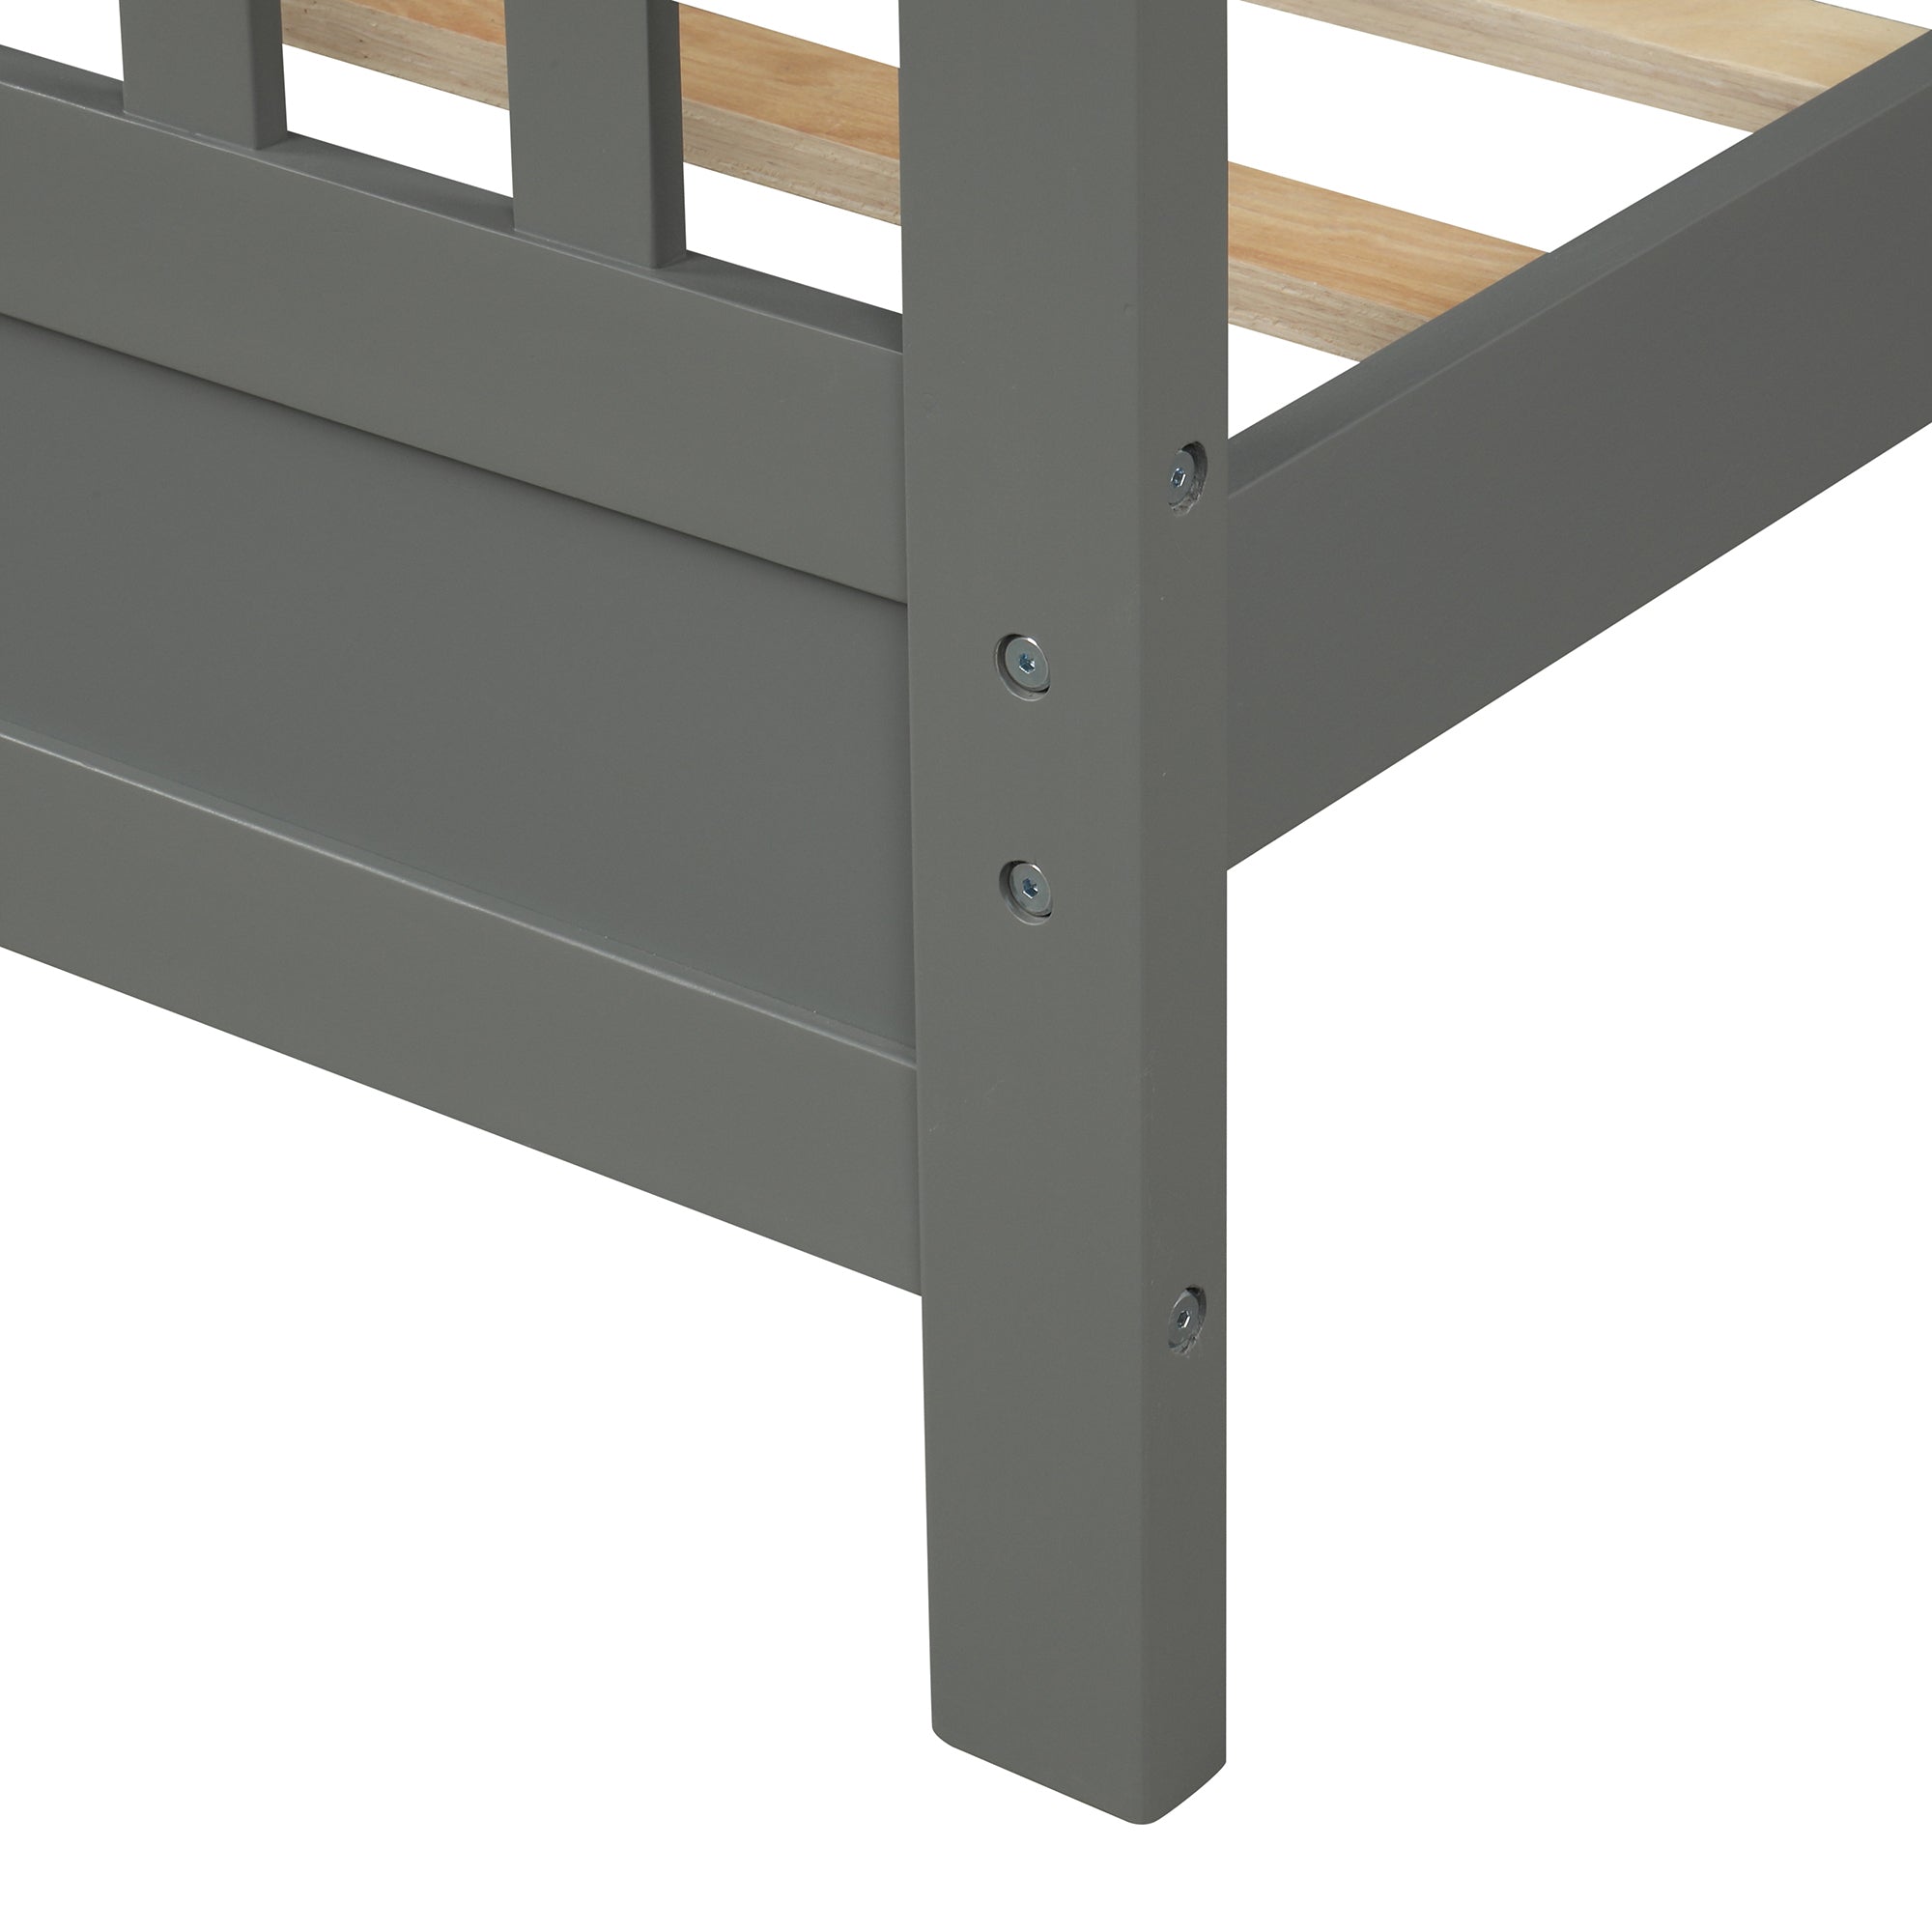 Wooden Platform Bed with Headboard and Footboard in Gray by: Alabama Beds